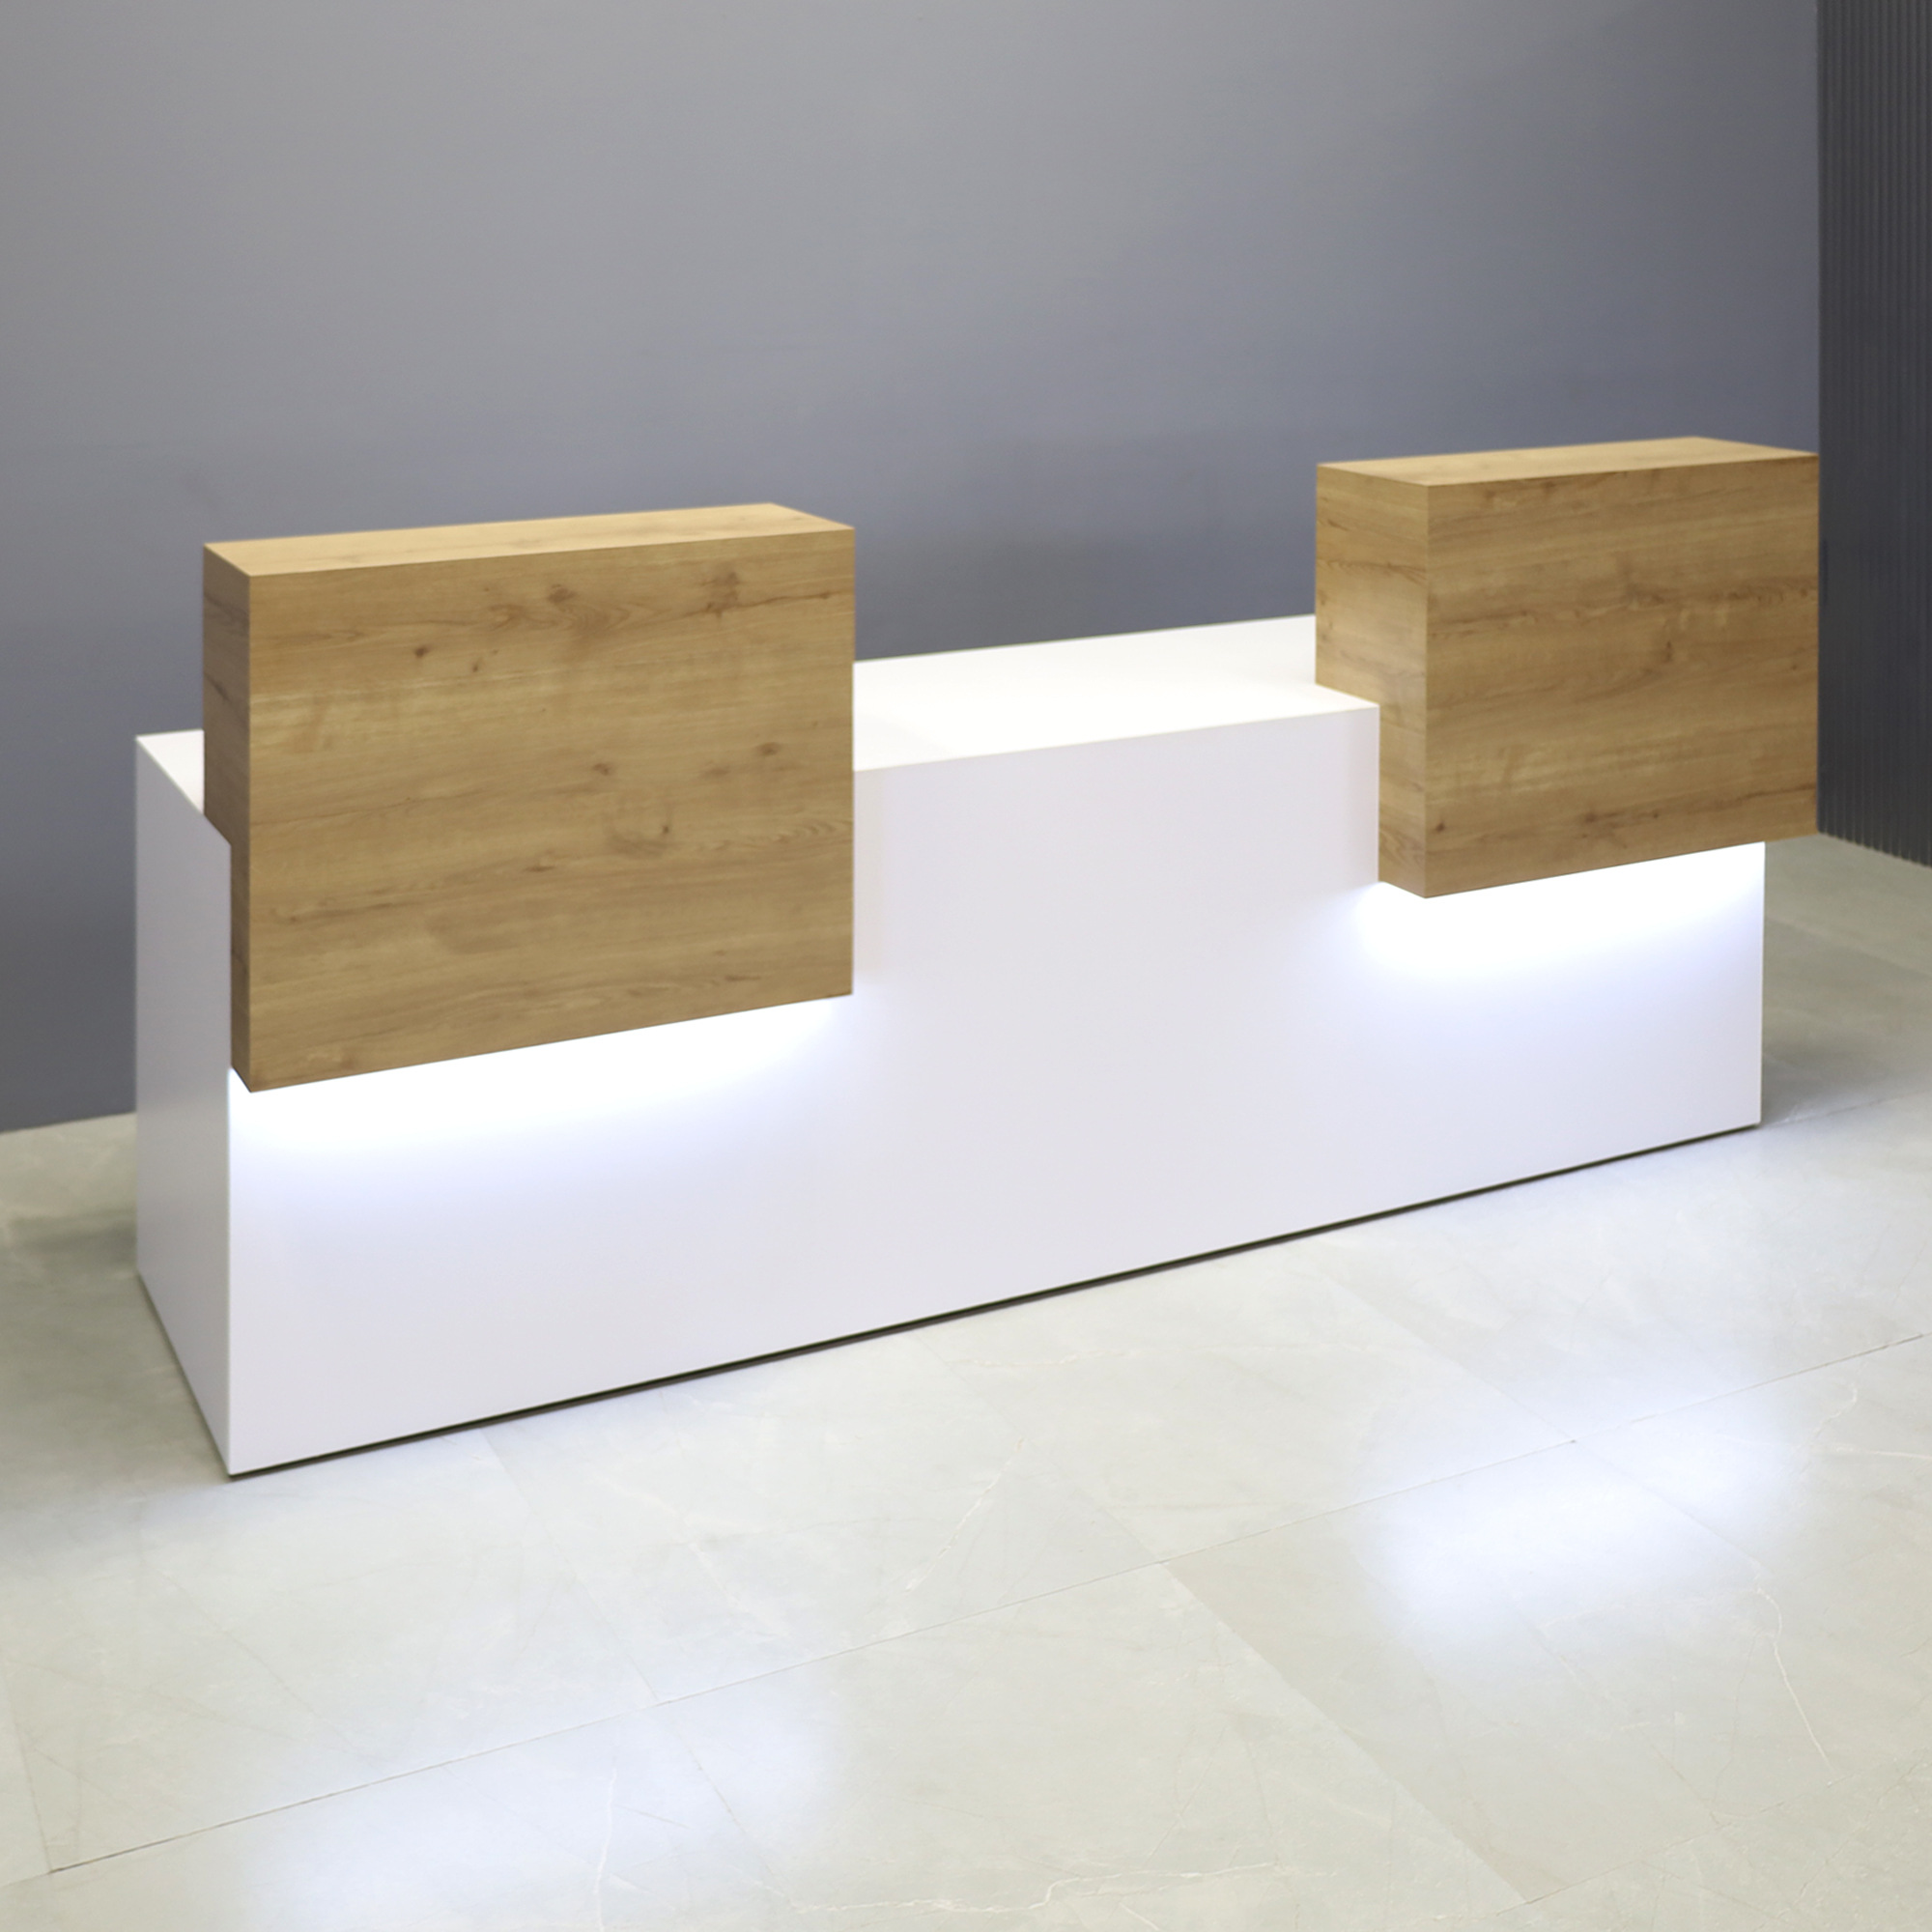 96-inch Los Angeles Double Counter Custom Reception Desk in planked urban oak counters and white matte laminate desk, with white LED, shown here.